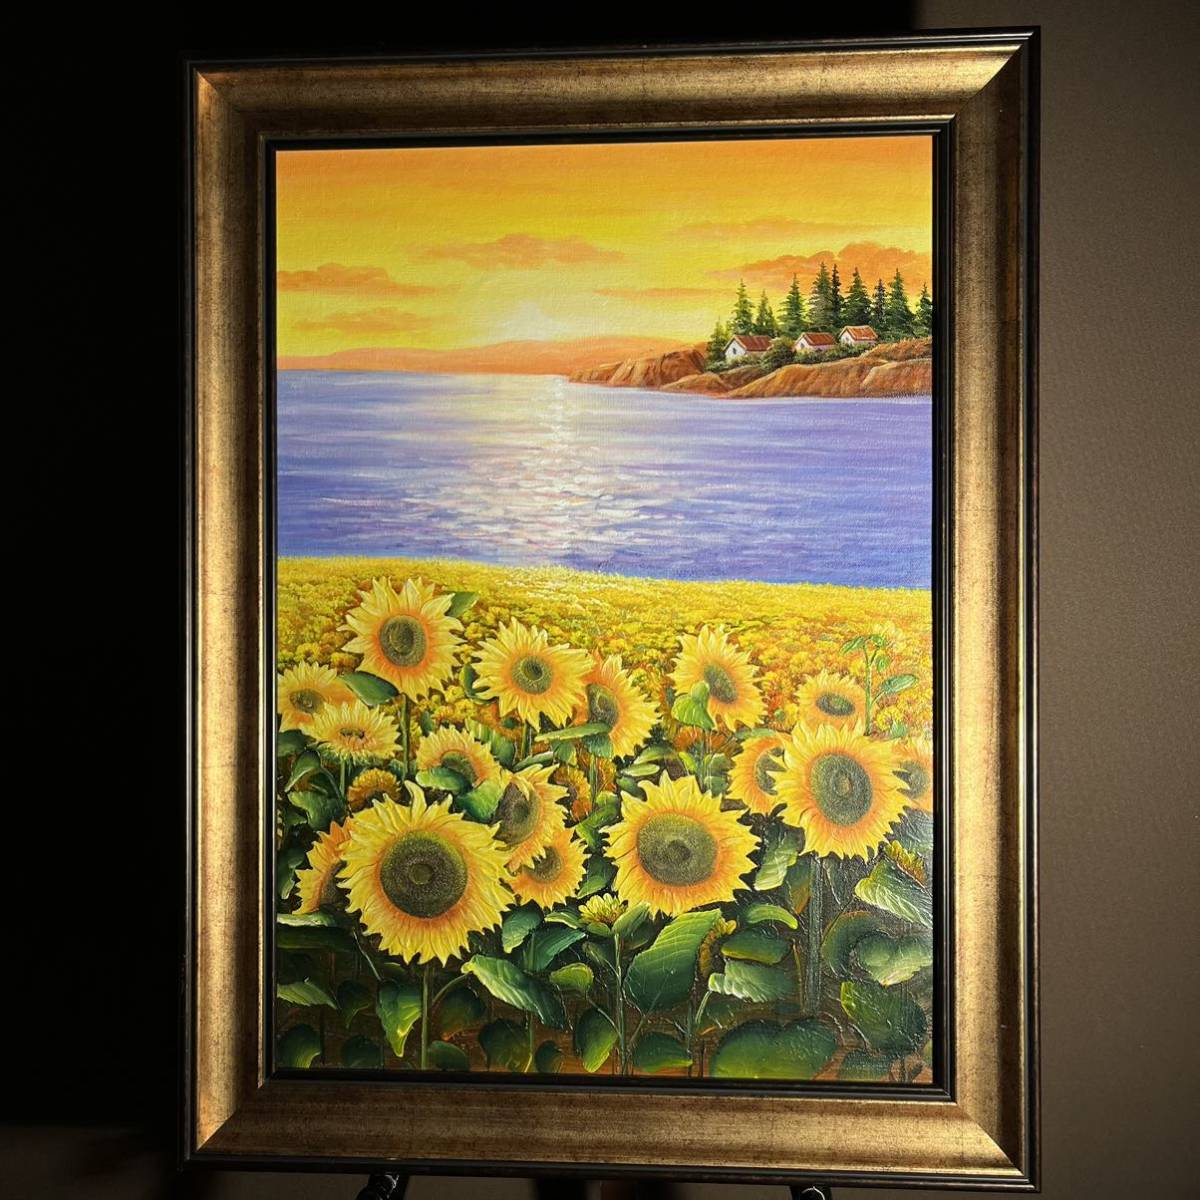 ★Excellent★ Hand-painted oil painting Sunflower field Framed painting Interior oil painting, Painting, Oil painting, Nature, Landscape painting